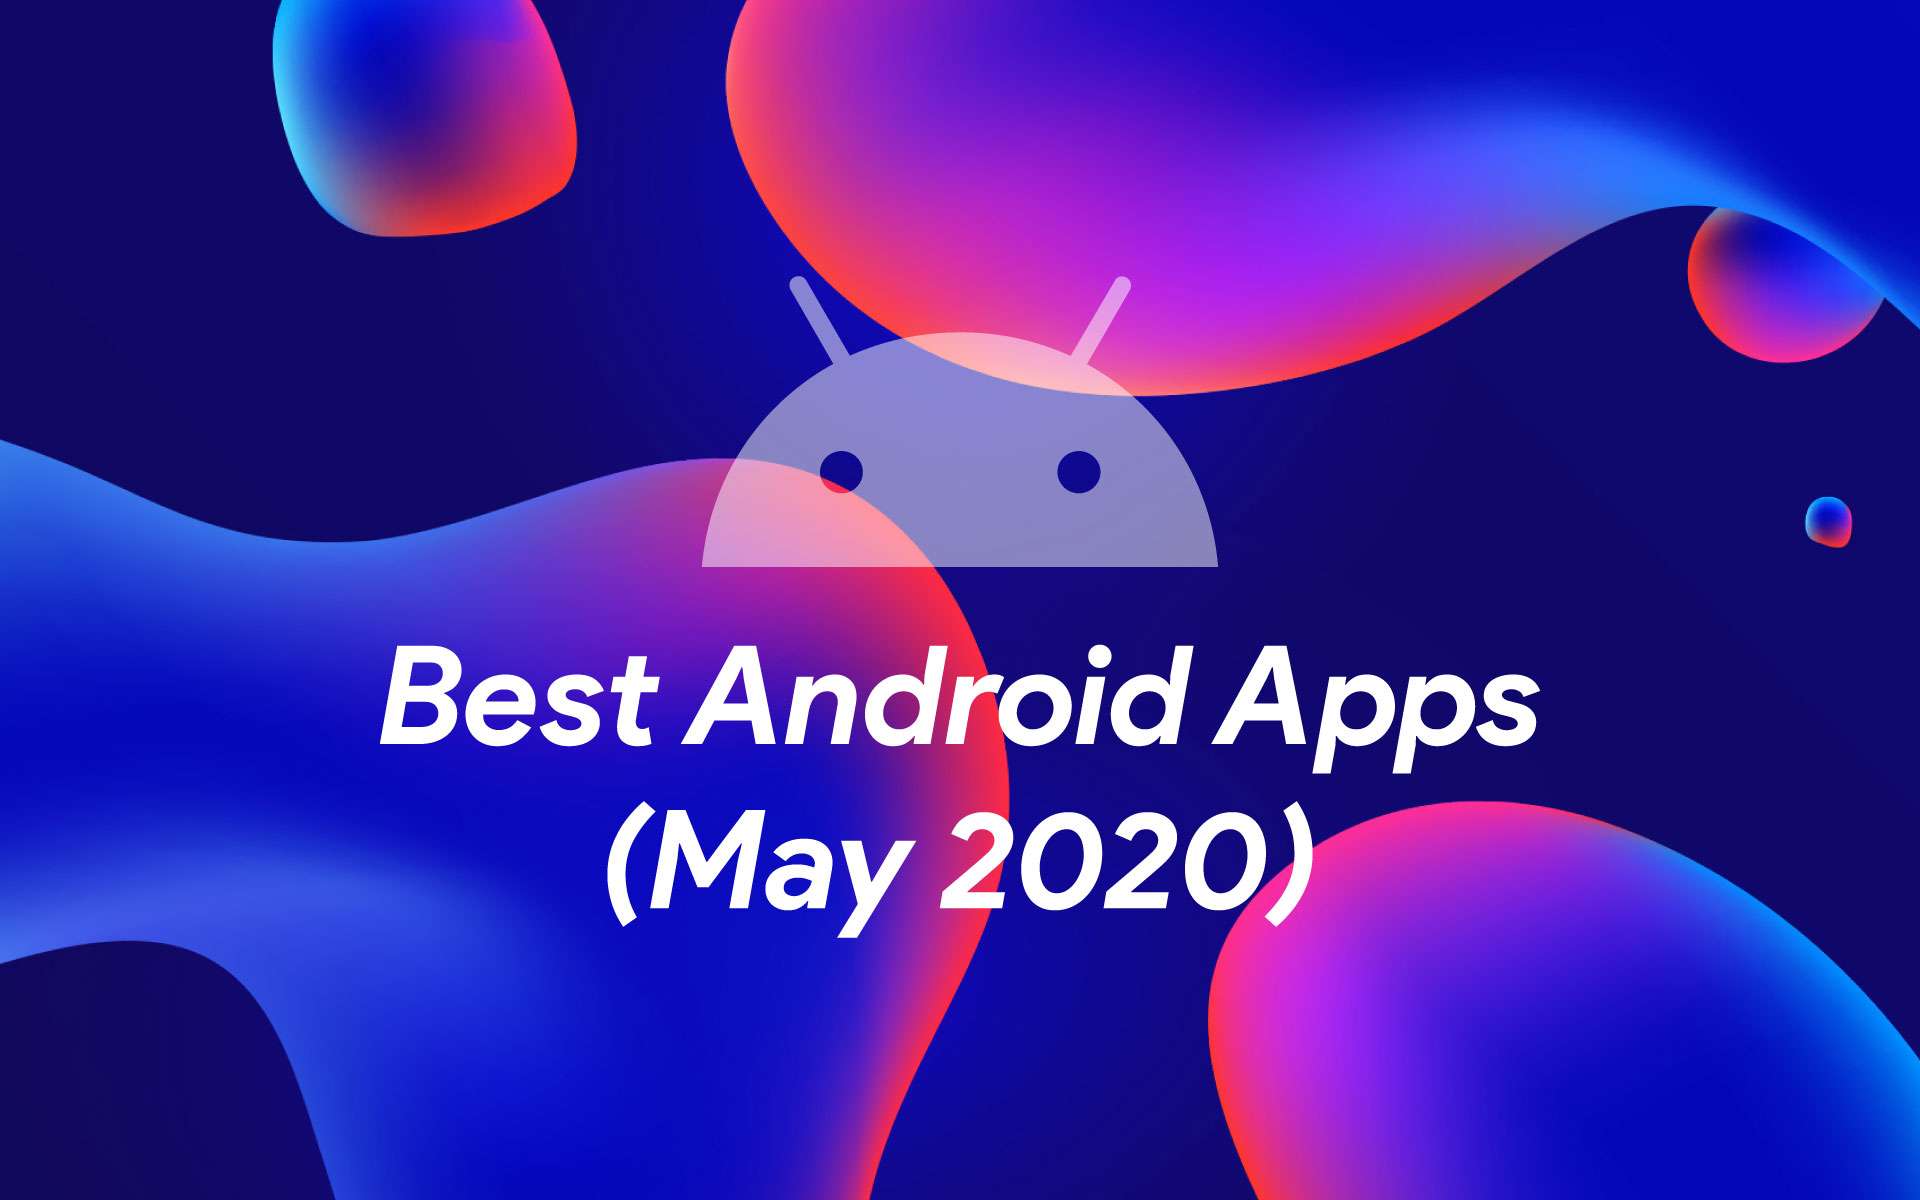 Best Android Apps for May 2020